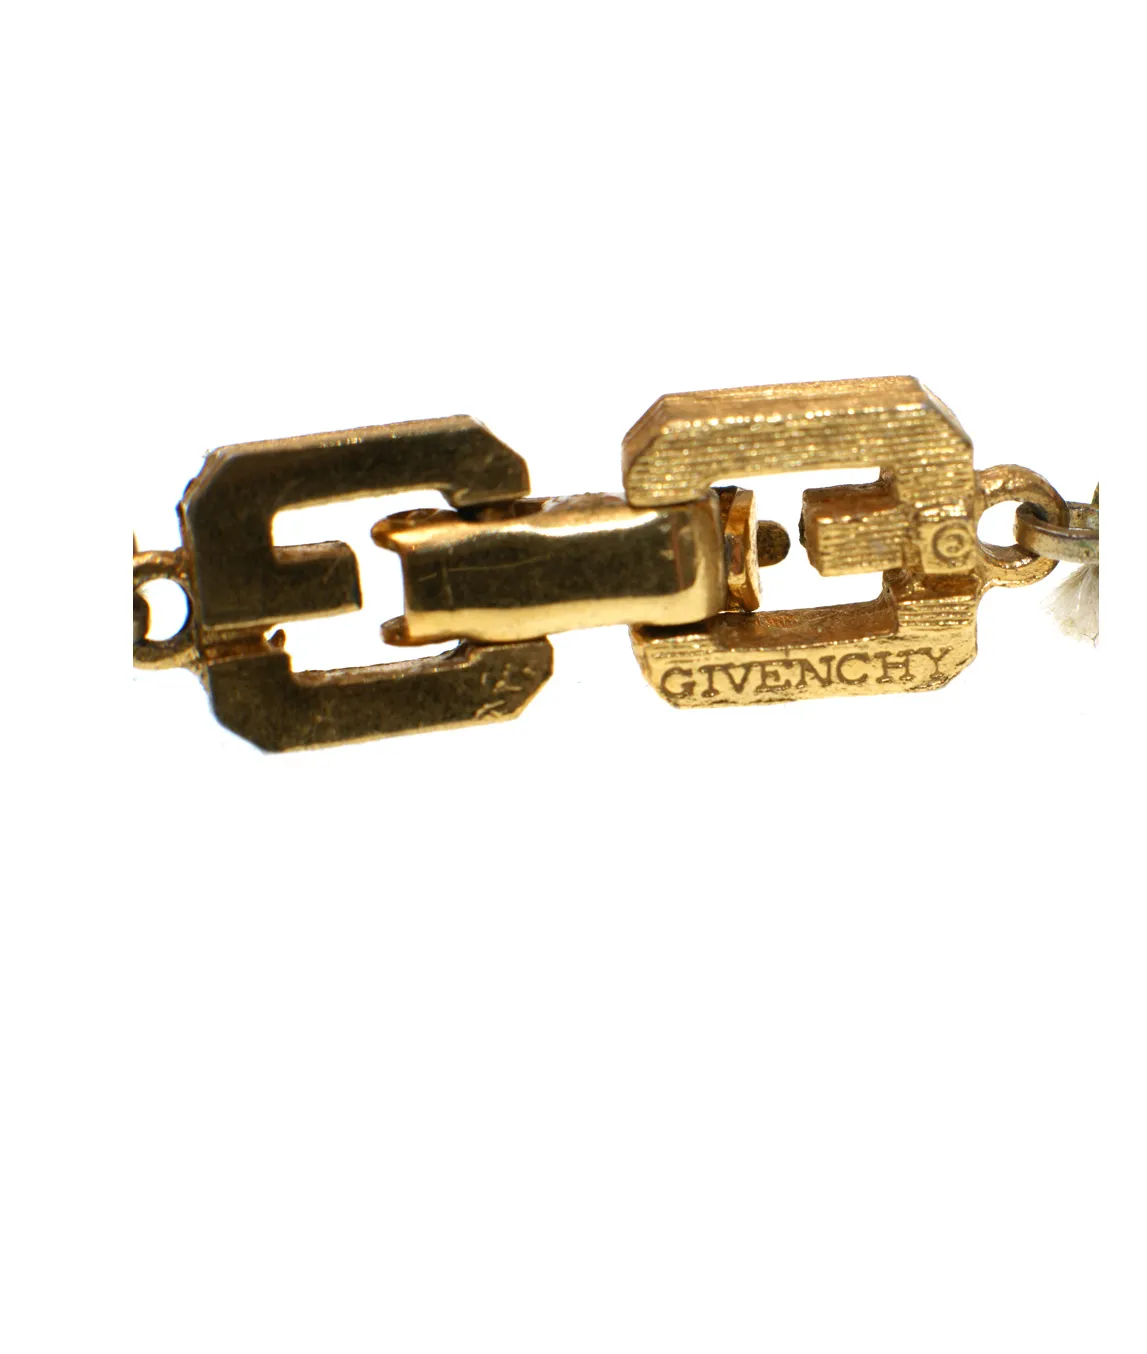 Givenchy stamped clasp